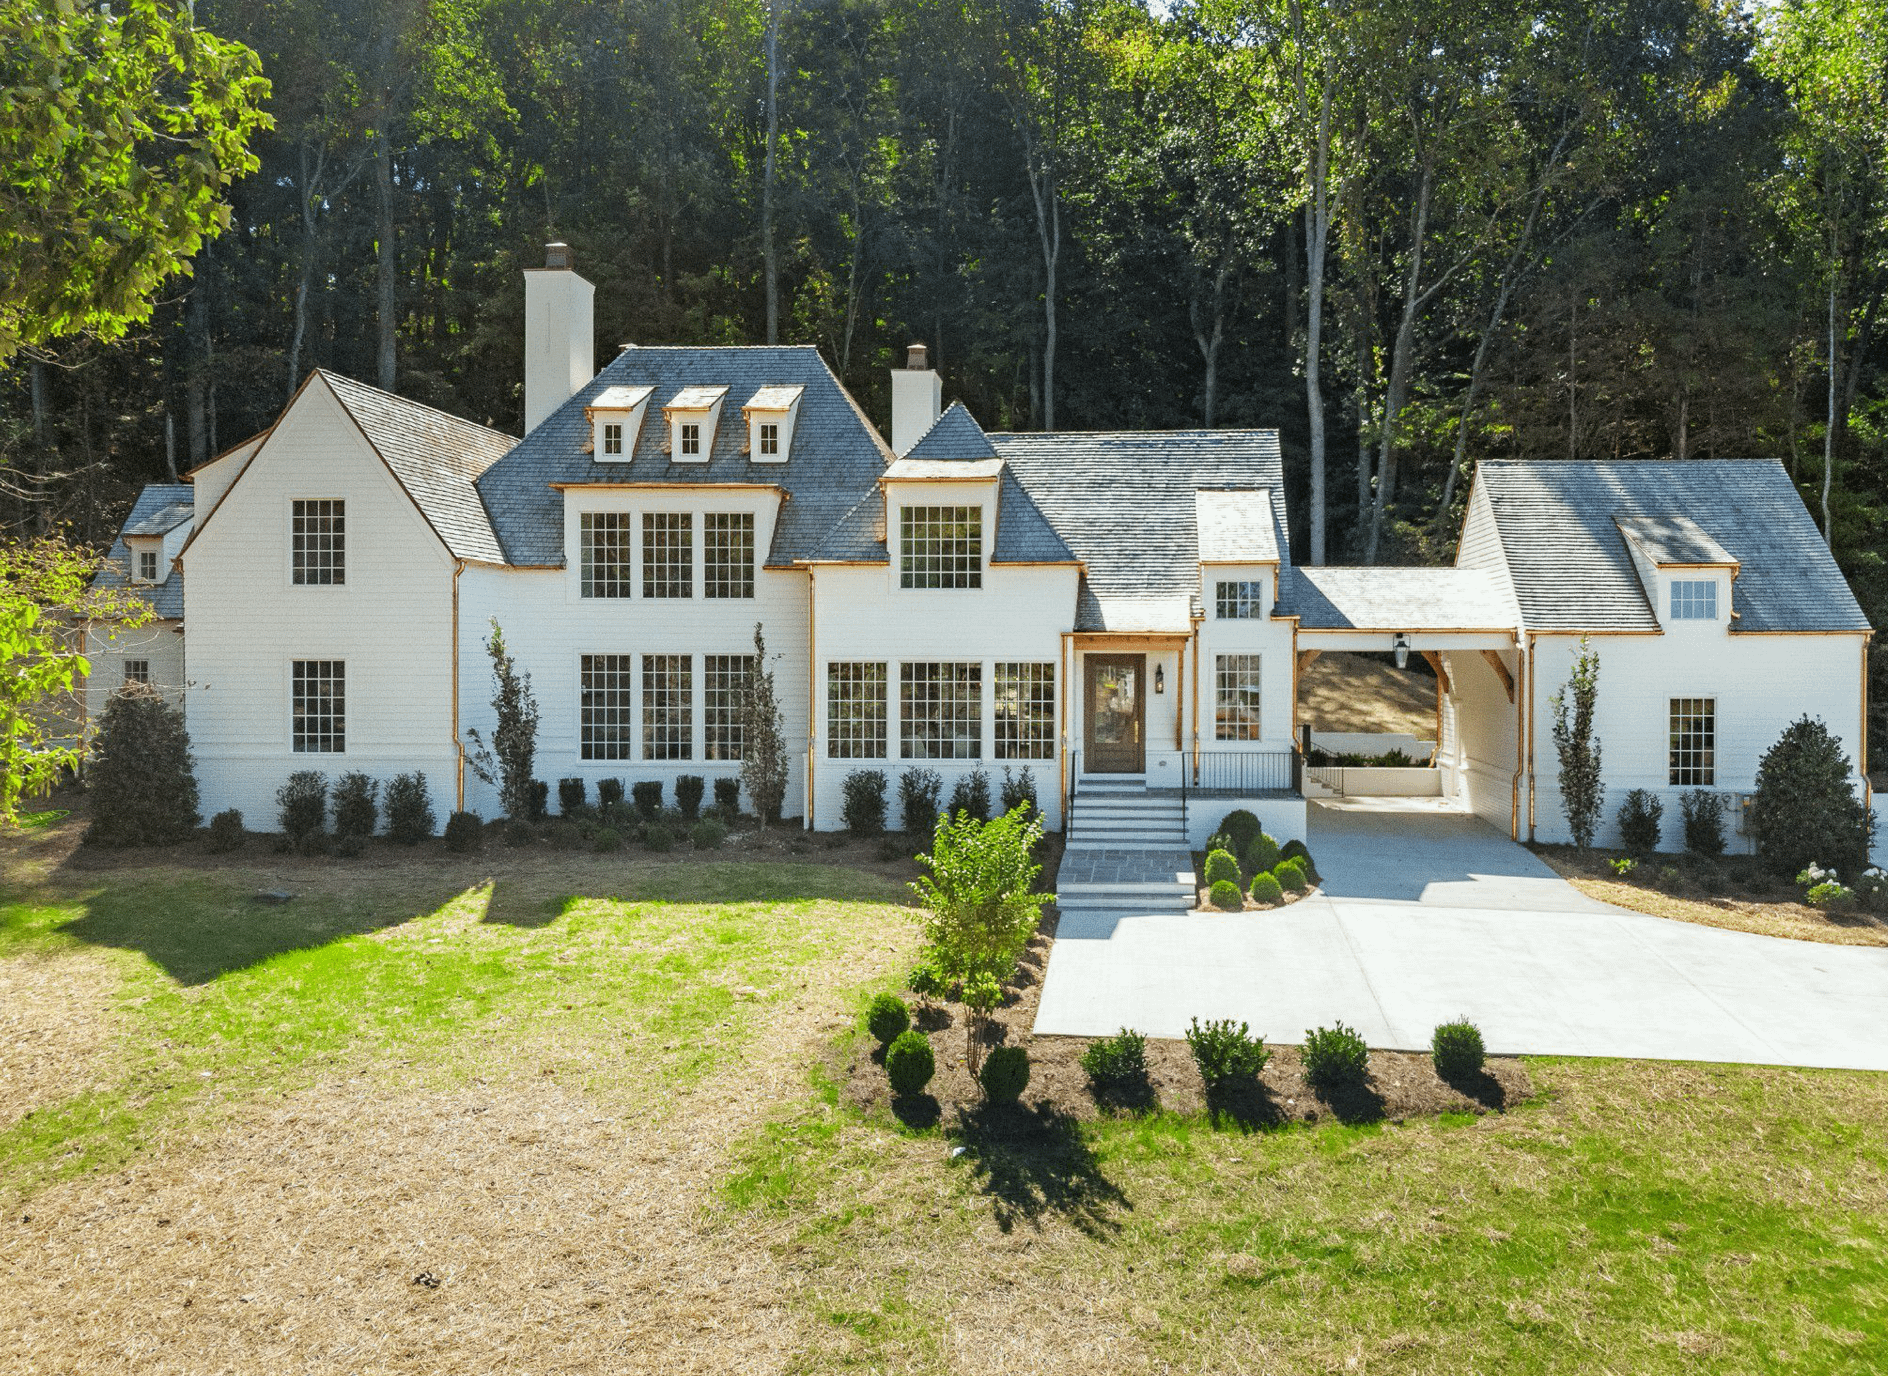 Tennessee New Build On 10 Acres (PHOTOS)